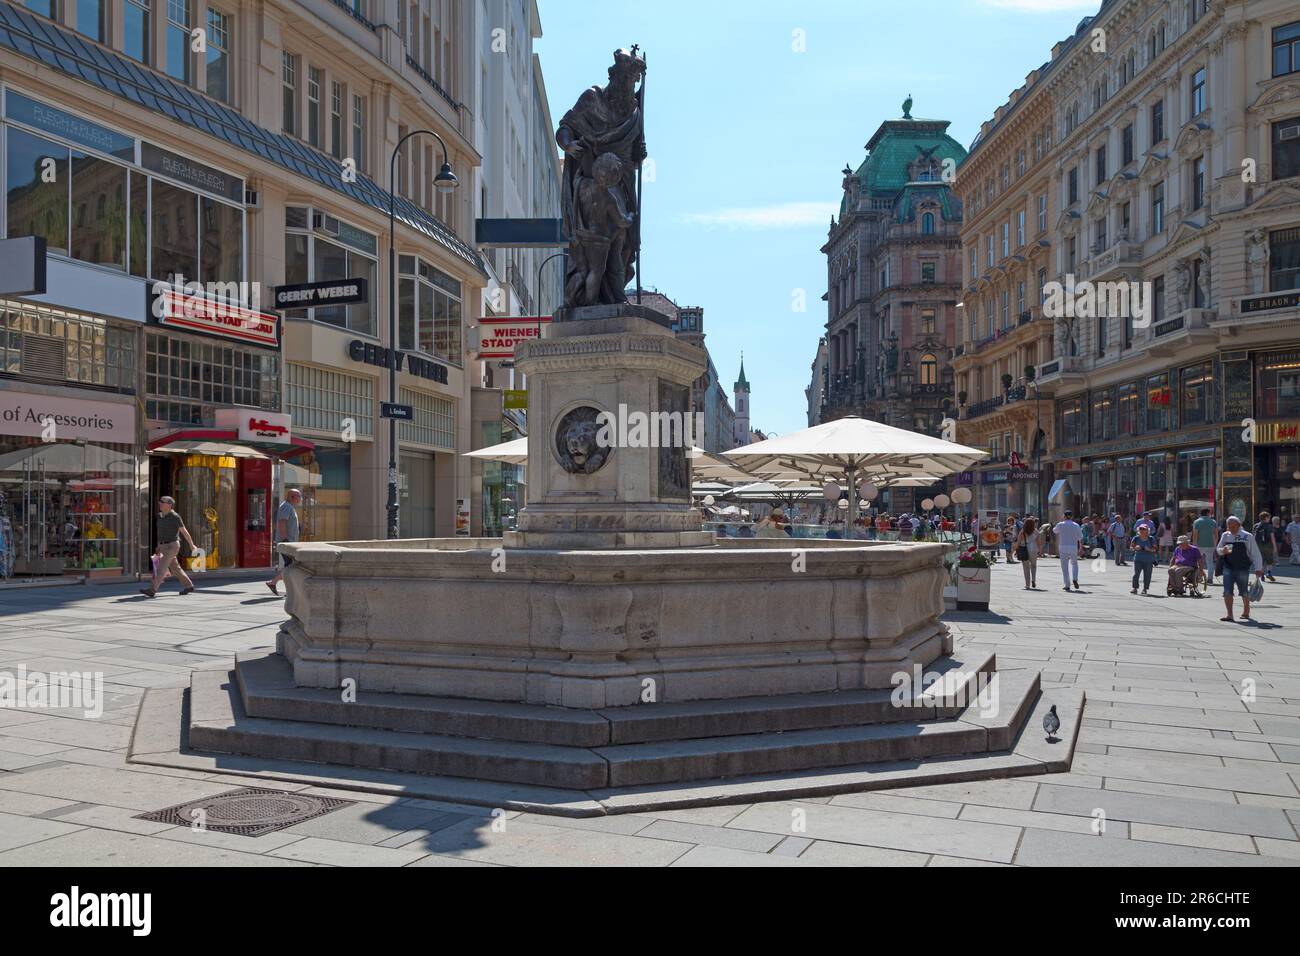 Vienna, Austria - June 17 2018: The Fountain of Leopold (German: Leopoldsbrunnen) is located on Graben, one of the most famous streets in the Austrian Stock Photo